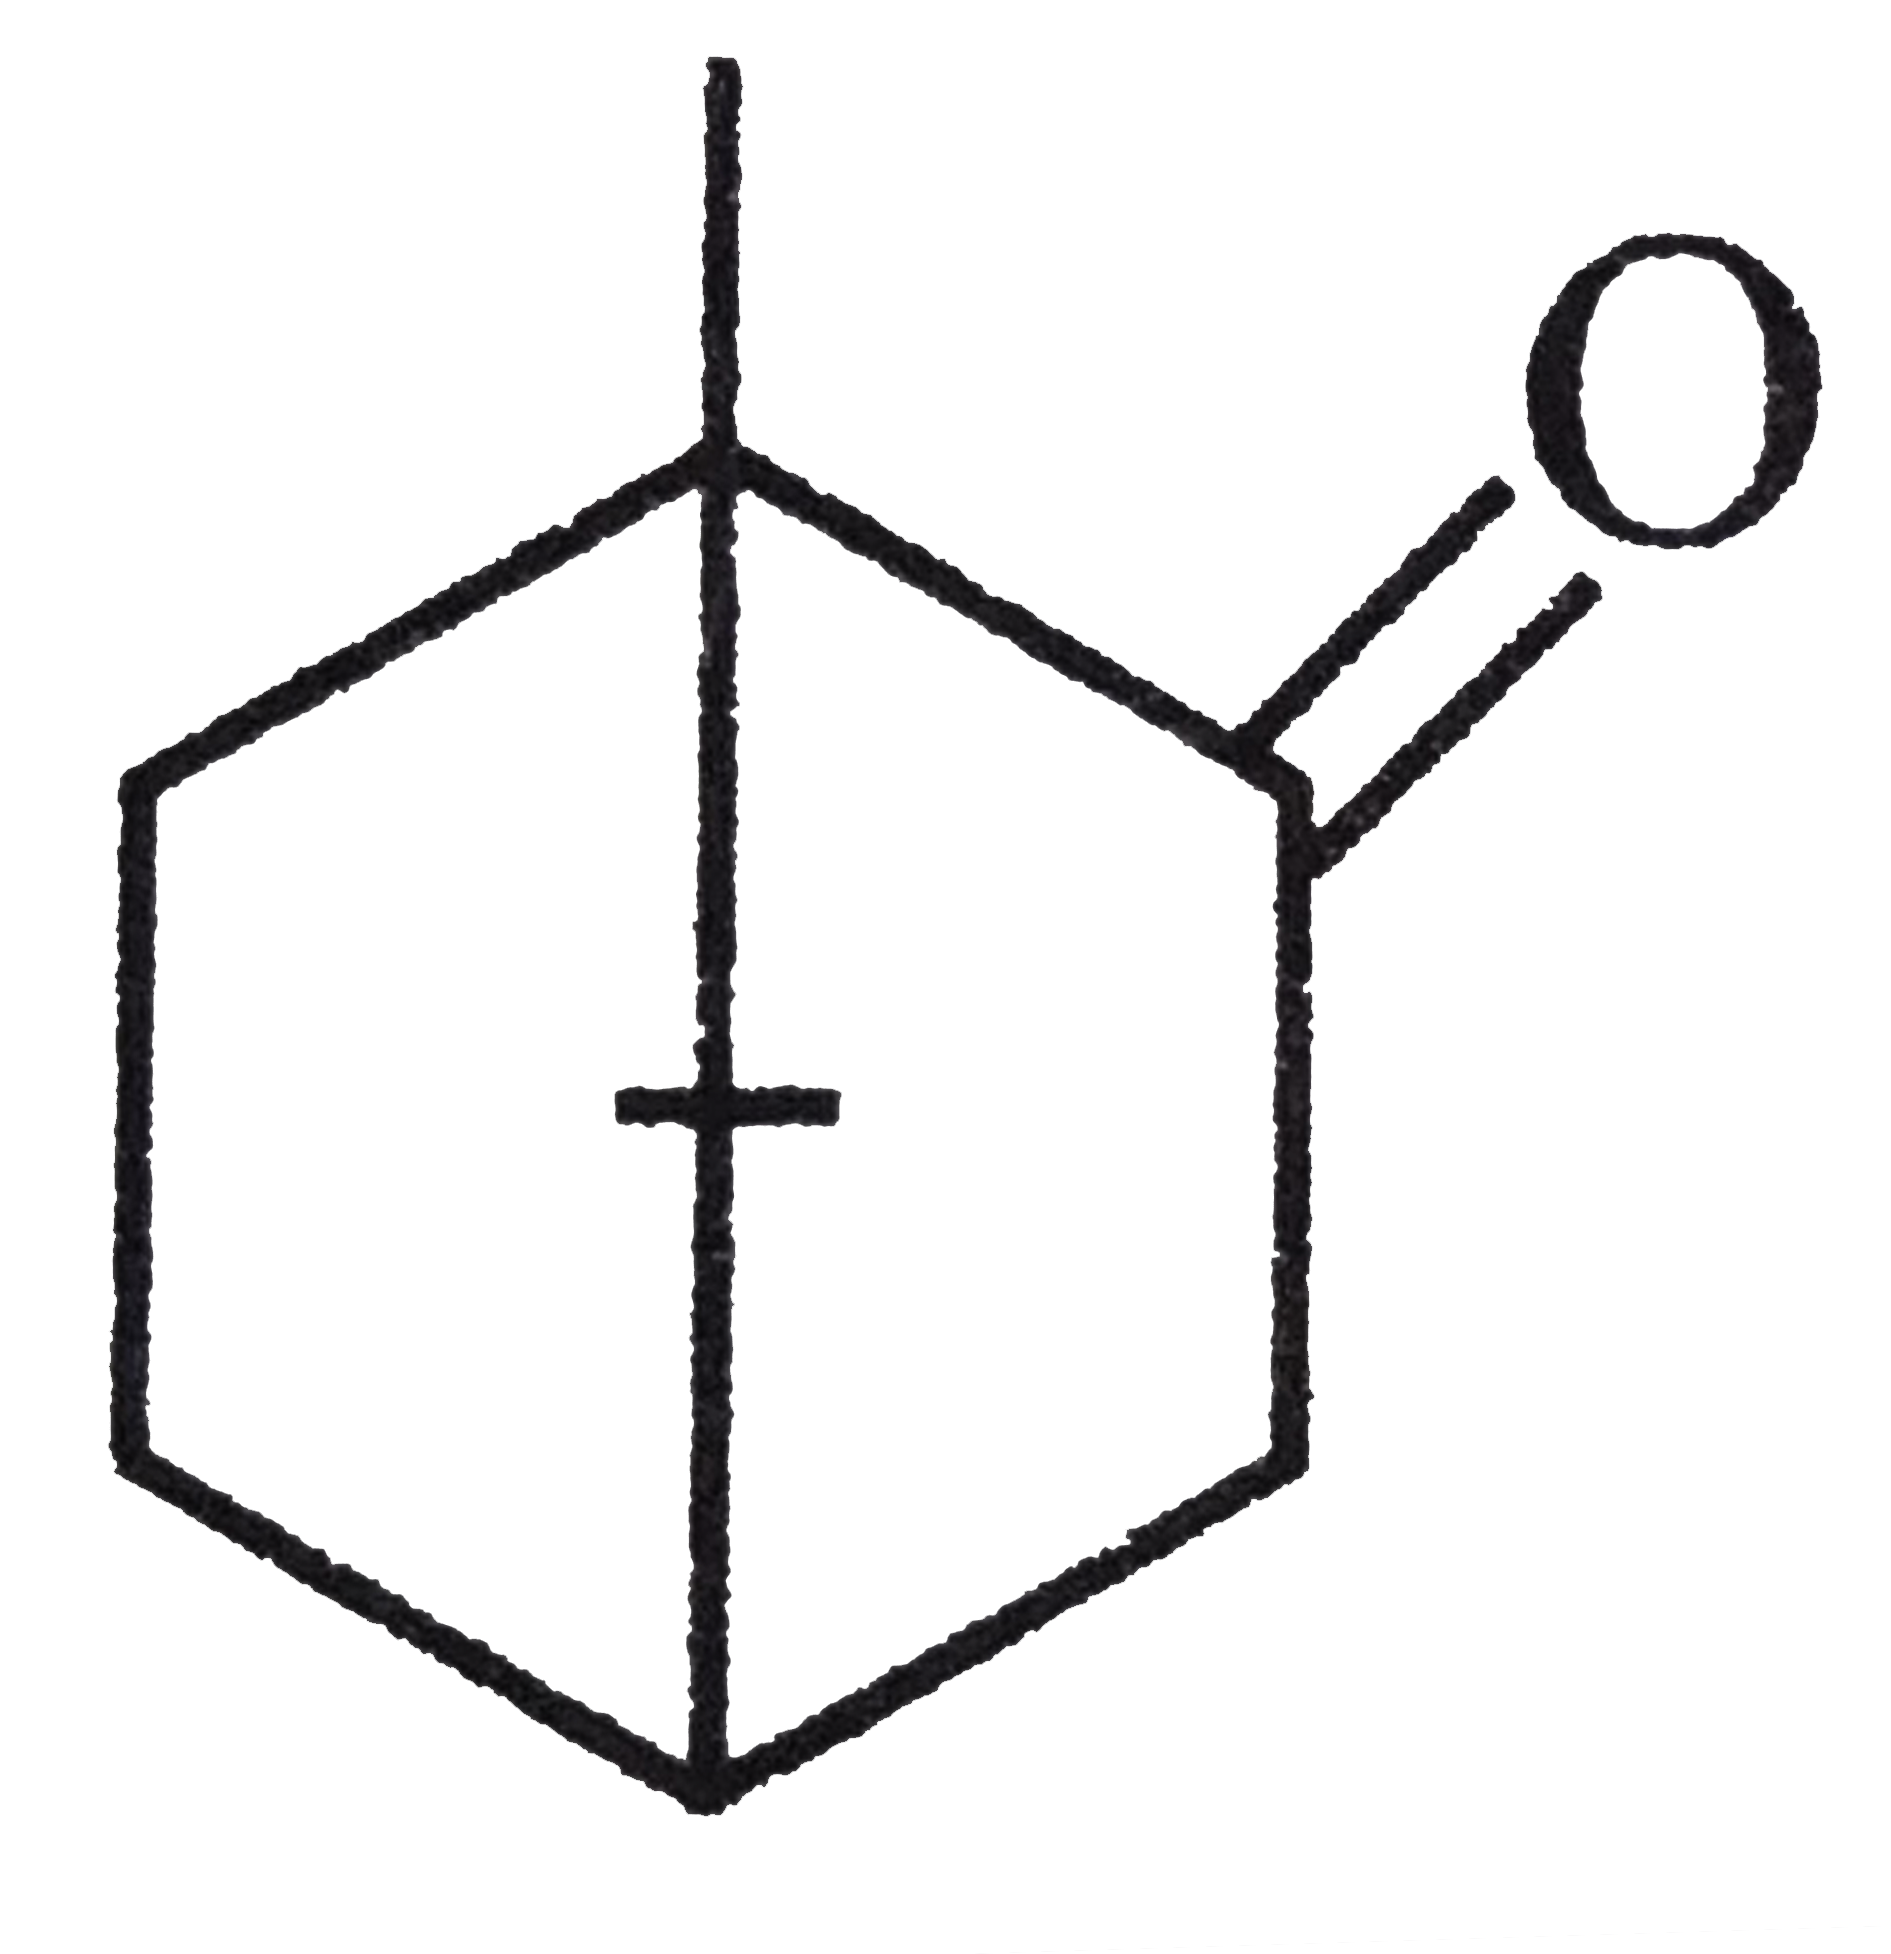 The IUPAC name of the well known terpene camphor having the structure    is